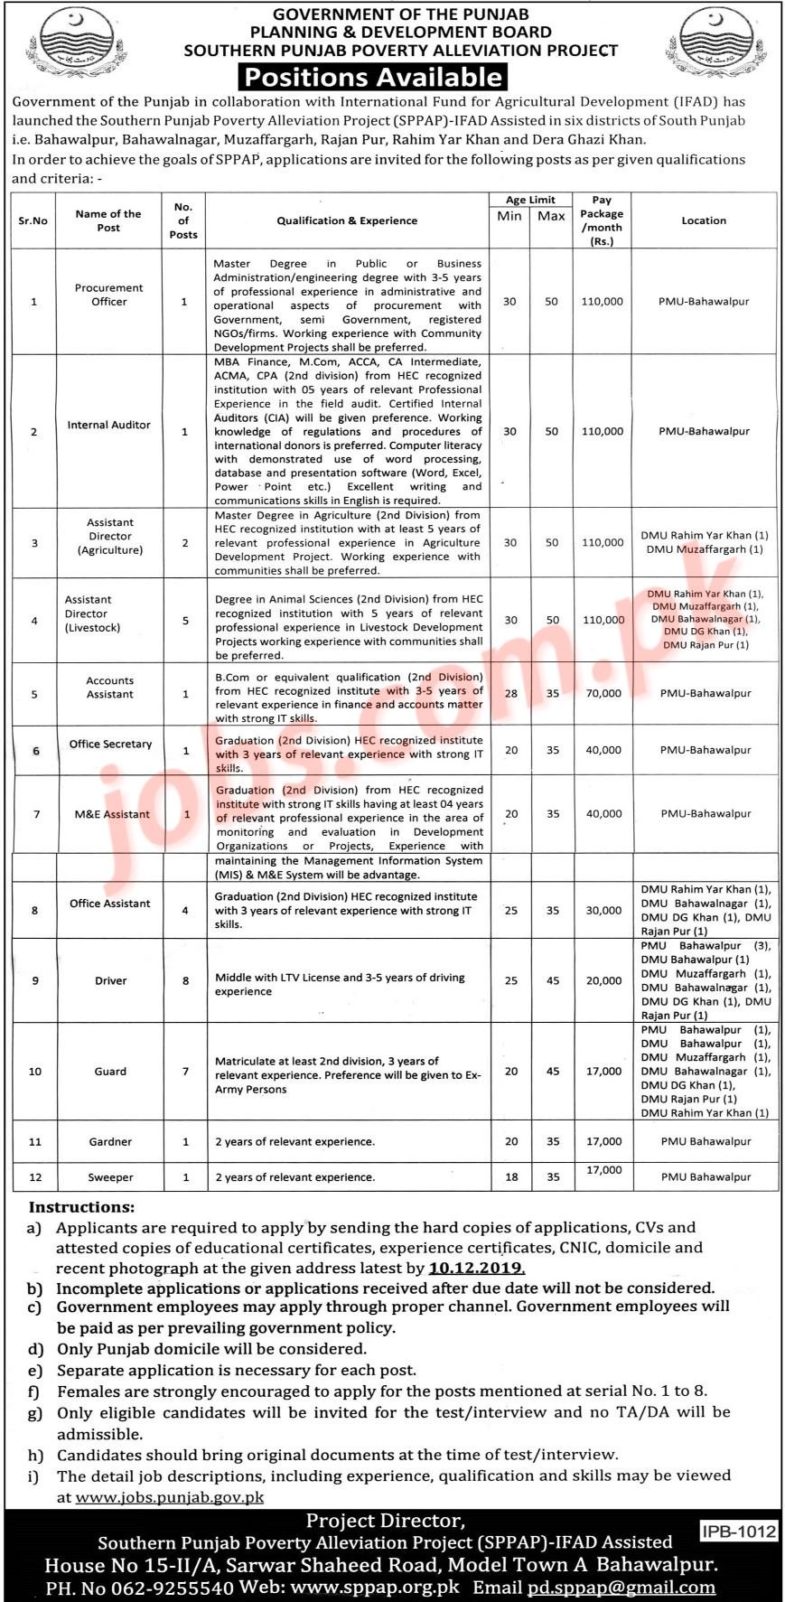 Planning,&,Development,Board,Punjab,Jobs,2019,for,22+,Office,Assistants,,Assistant,Directors,,Accounts,,Procurement,,&,Other Posted:,20,Nov,2019,01:37,AM,PST Planning,&,Development,Board,Punjab,Jobs,2019,for,22+,Office,Assistants,,Assistant,Directors,,Accounts,,Procurement,,&,Other,to,be,filled,immediately.,Required,qualification,from,a,recognized,institution,and,relevant,work... ,